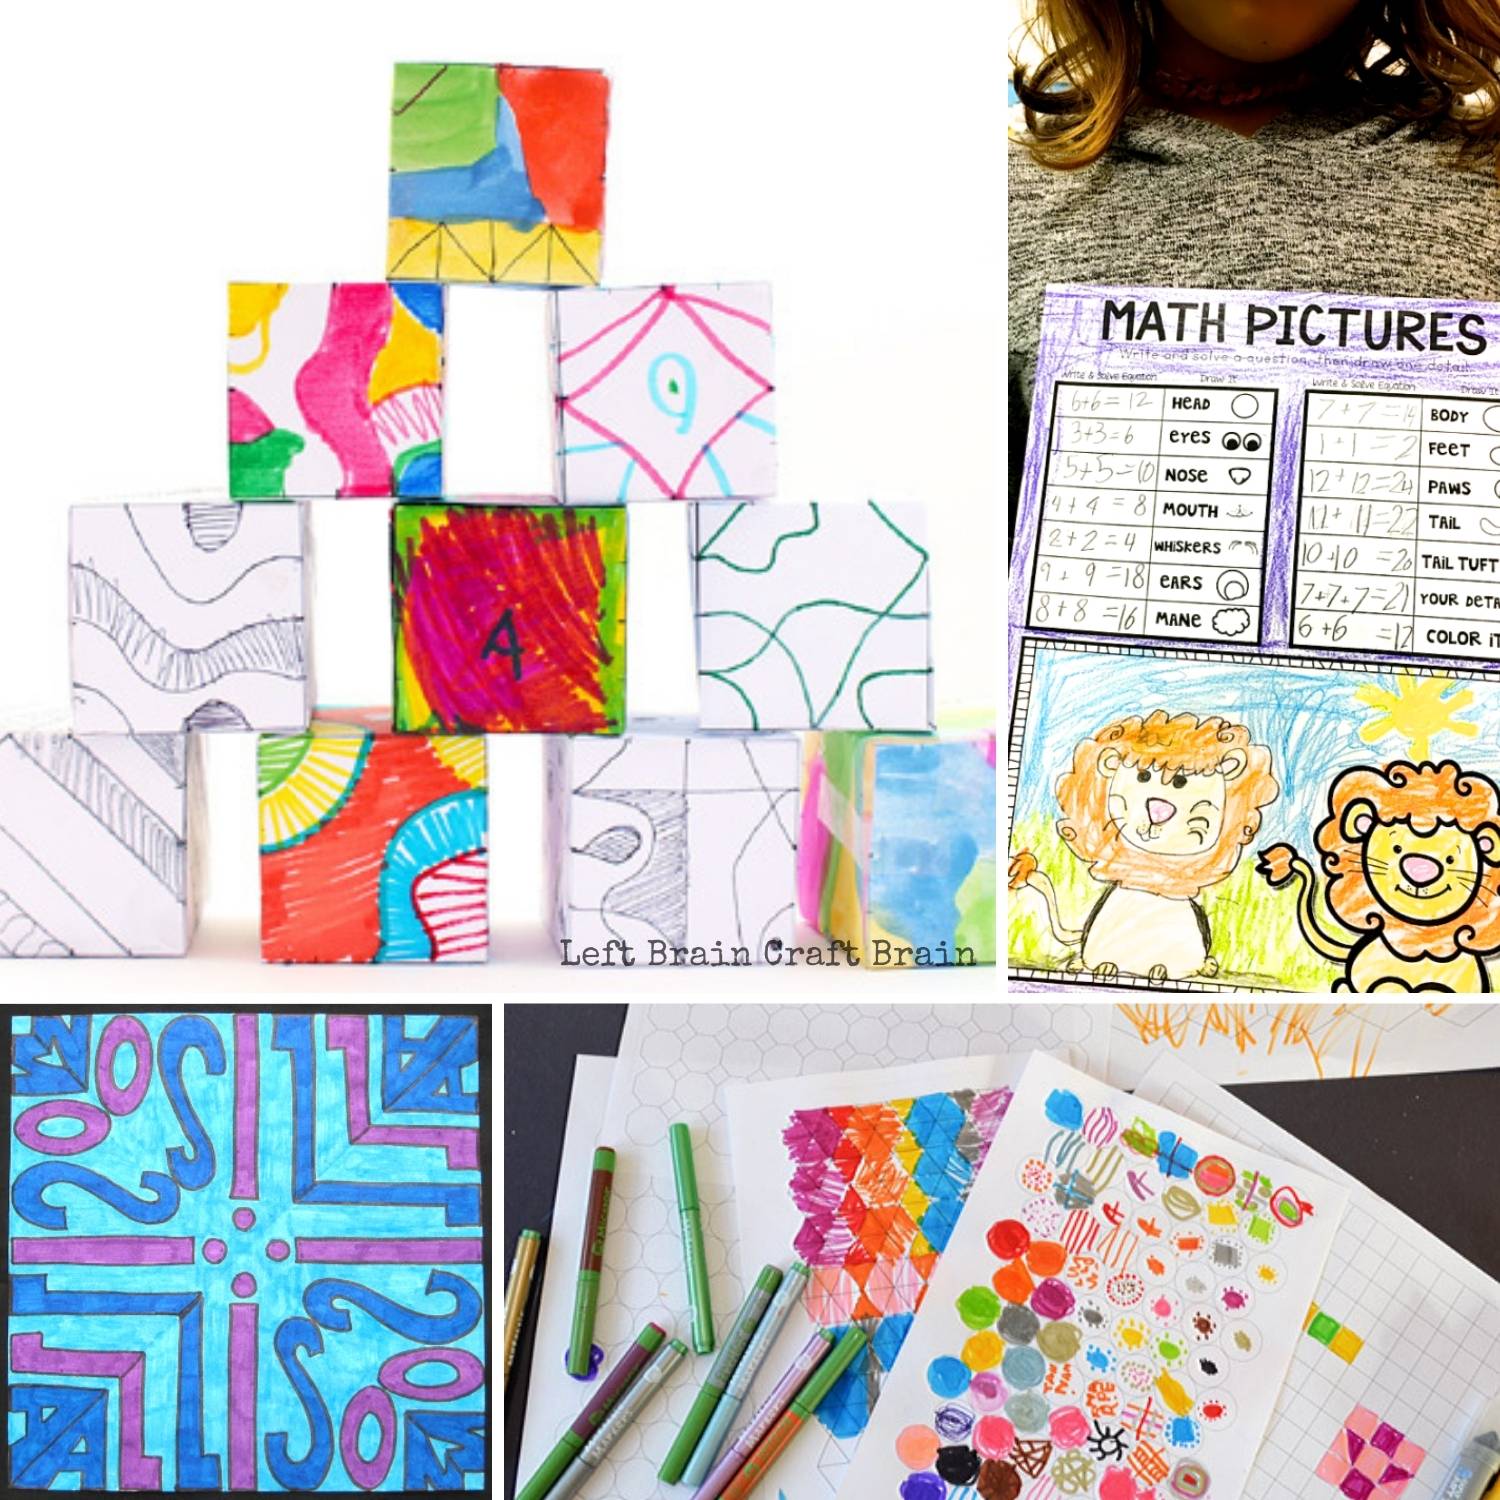 Power up your child's next drawing session with these fun STEAM-filled drawing activities that add math, science, engineering, and more.